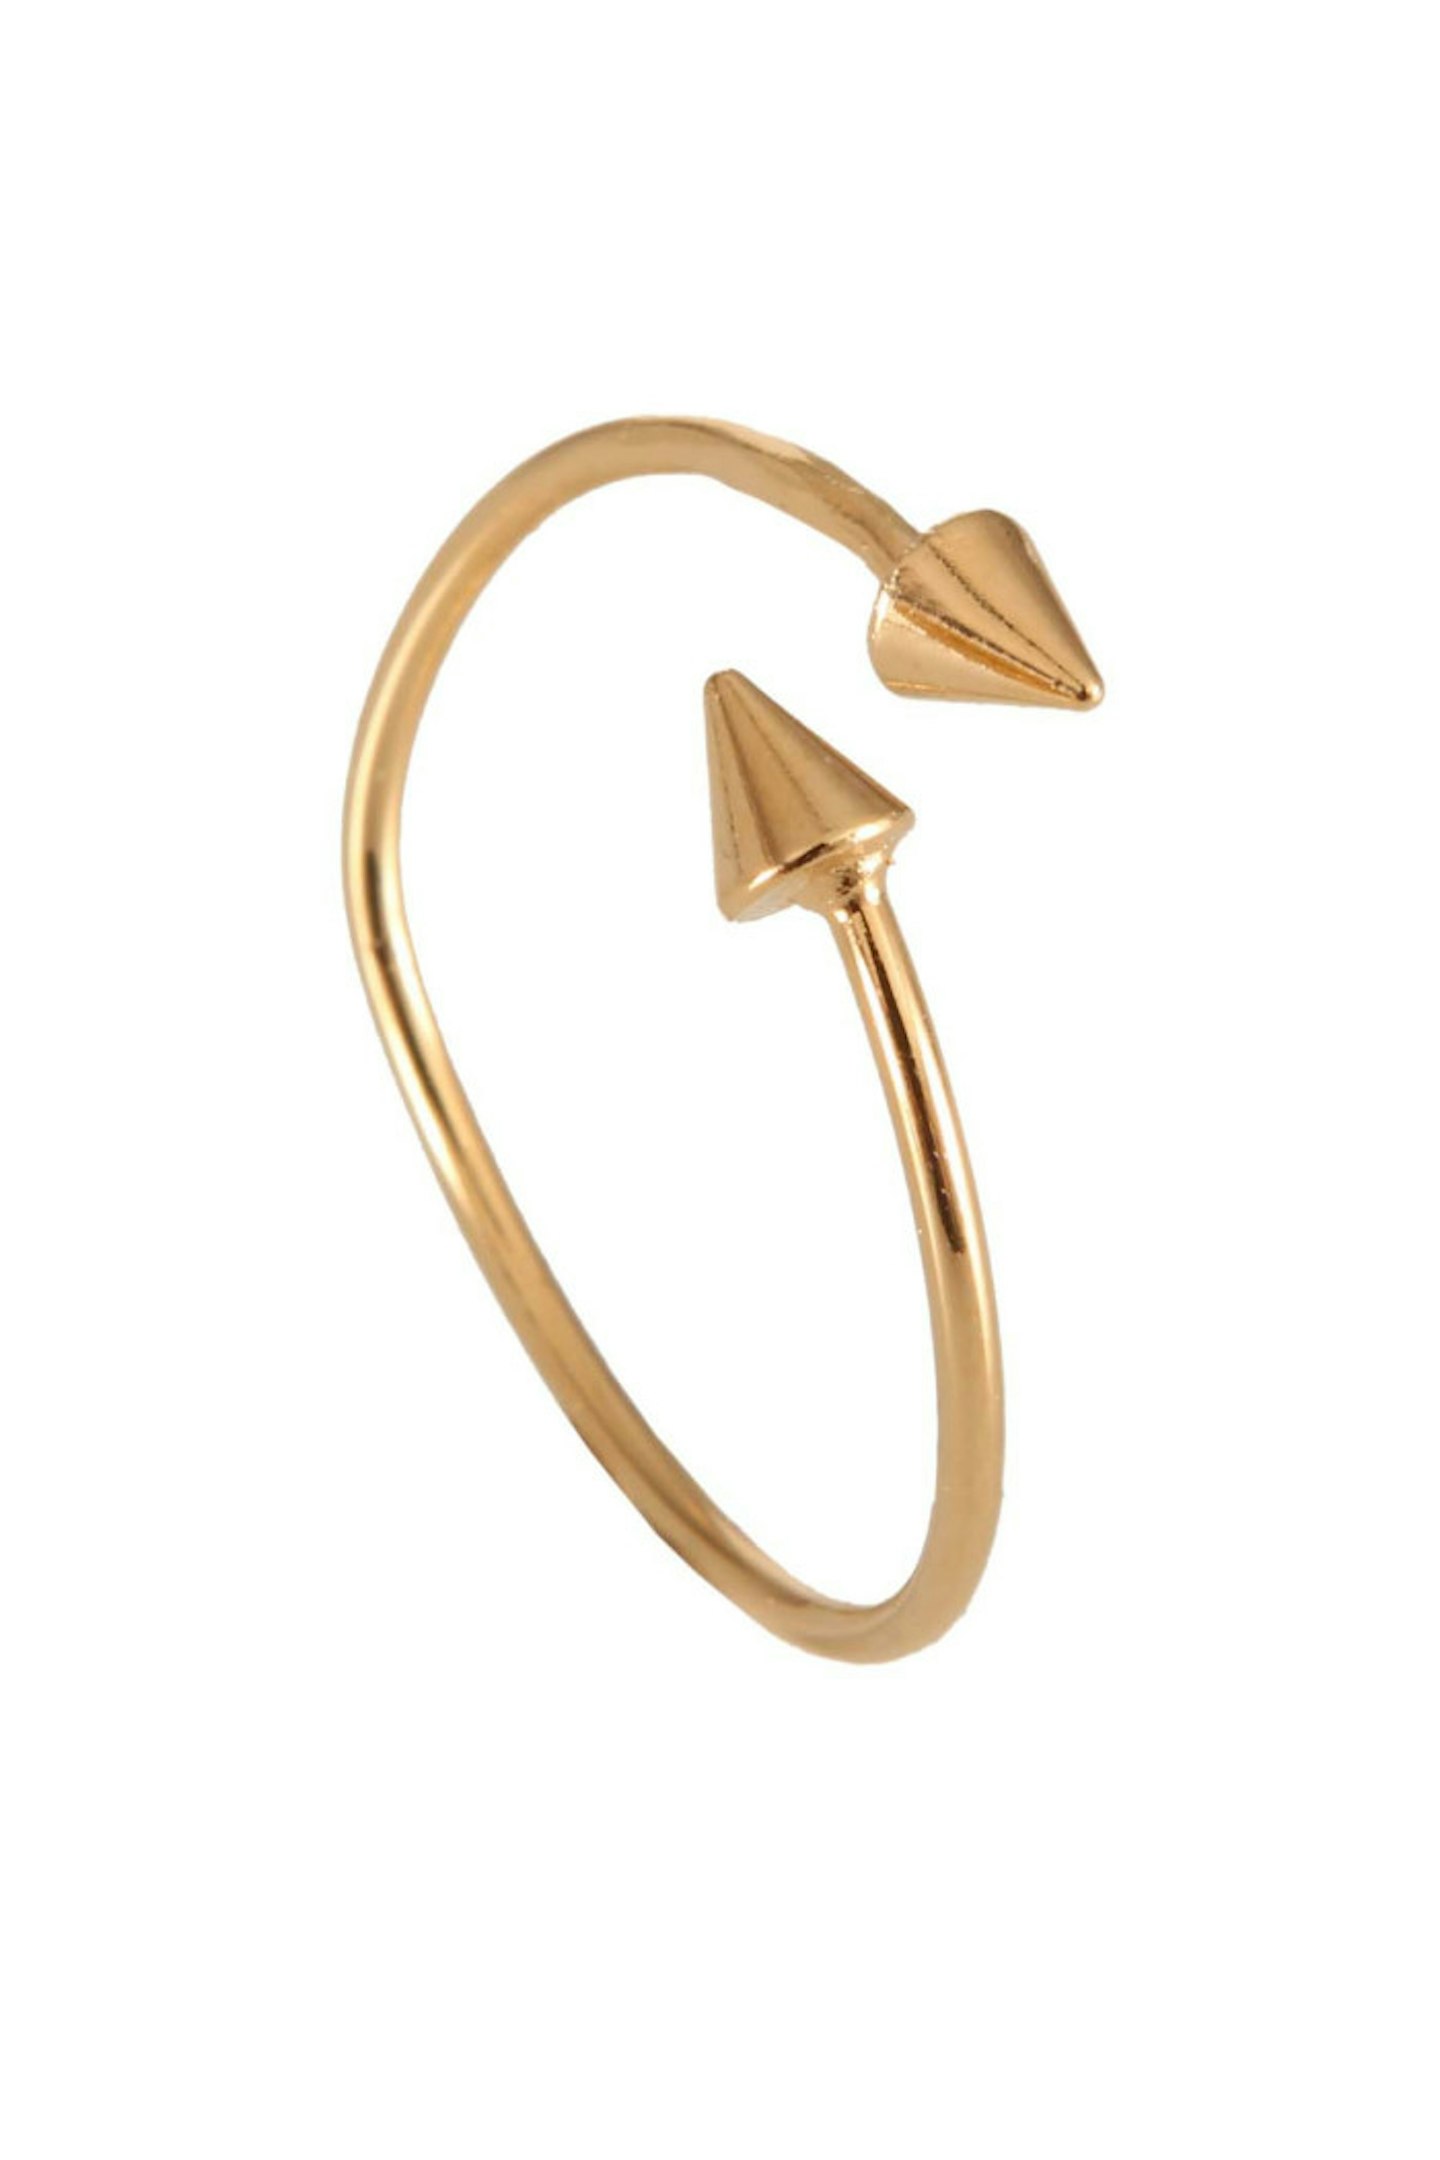 1. Double spike gold-plated open ring